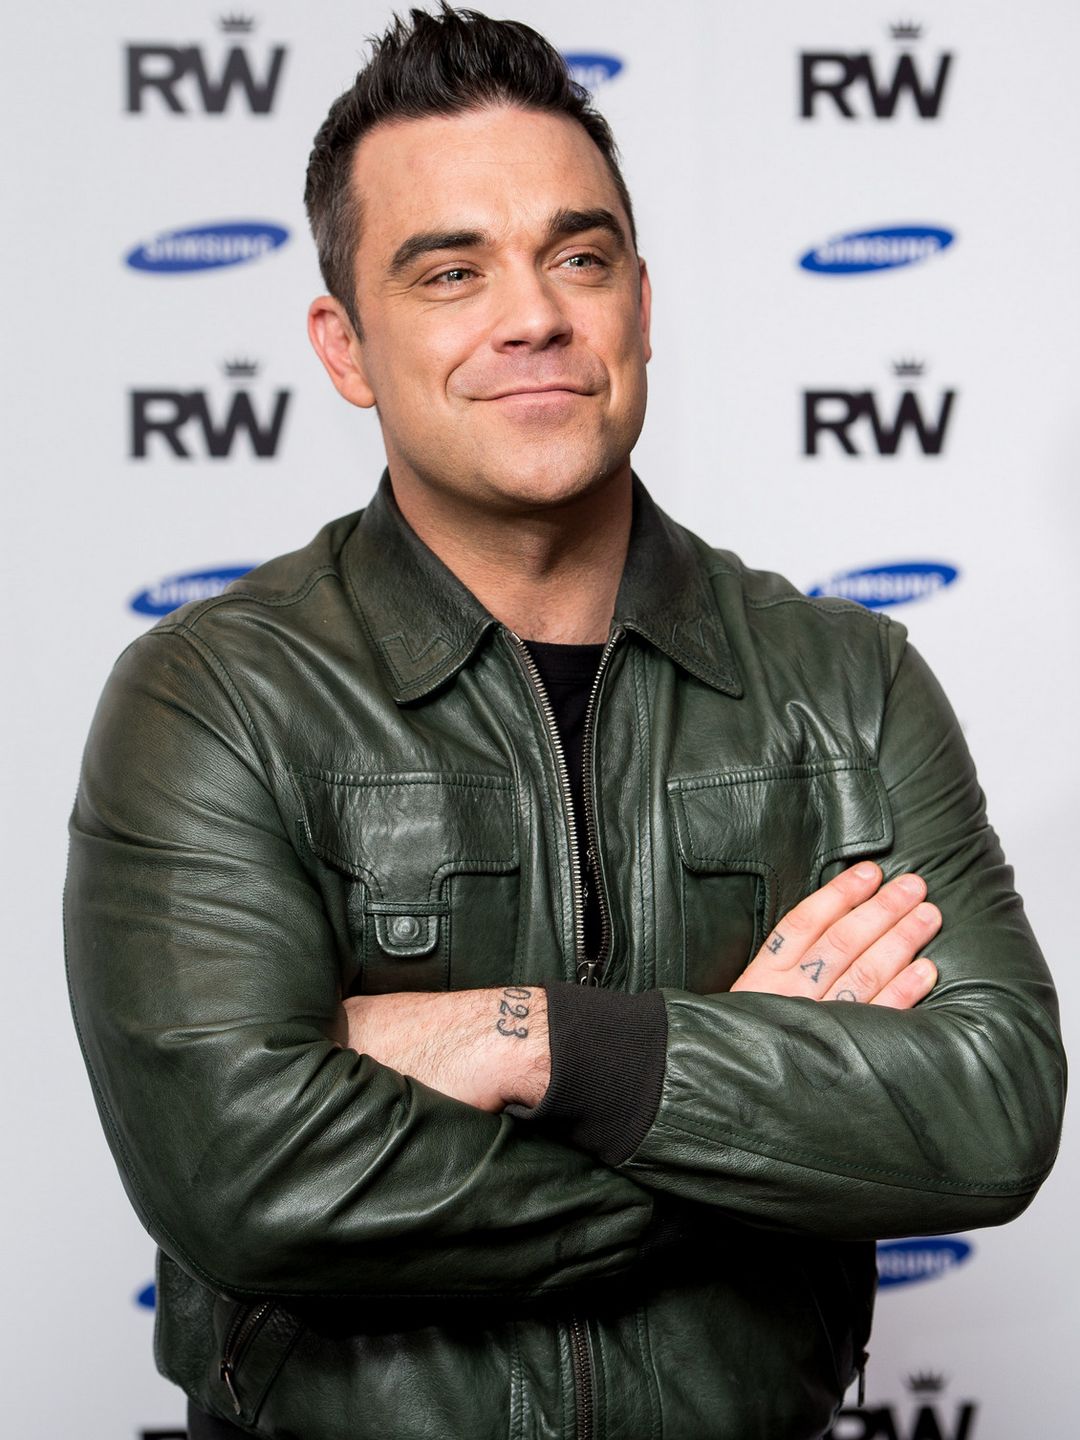 Robbie Williams who is his mother